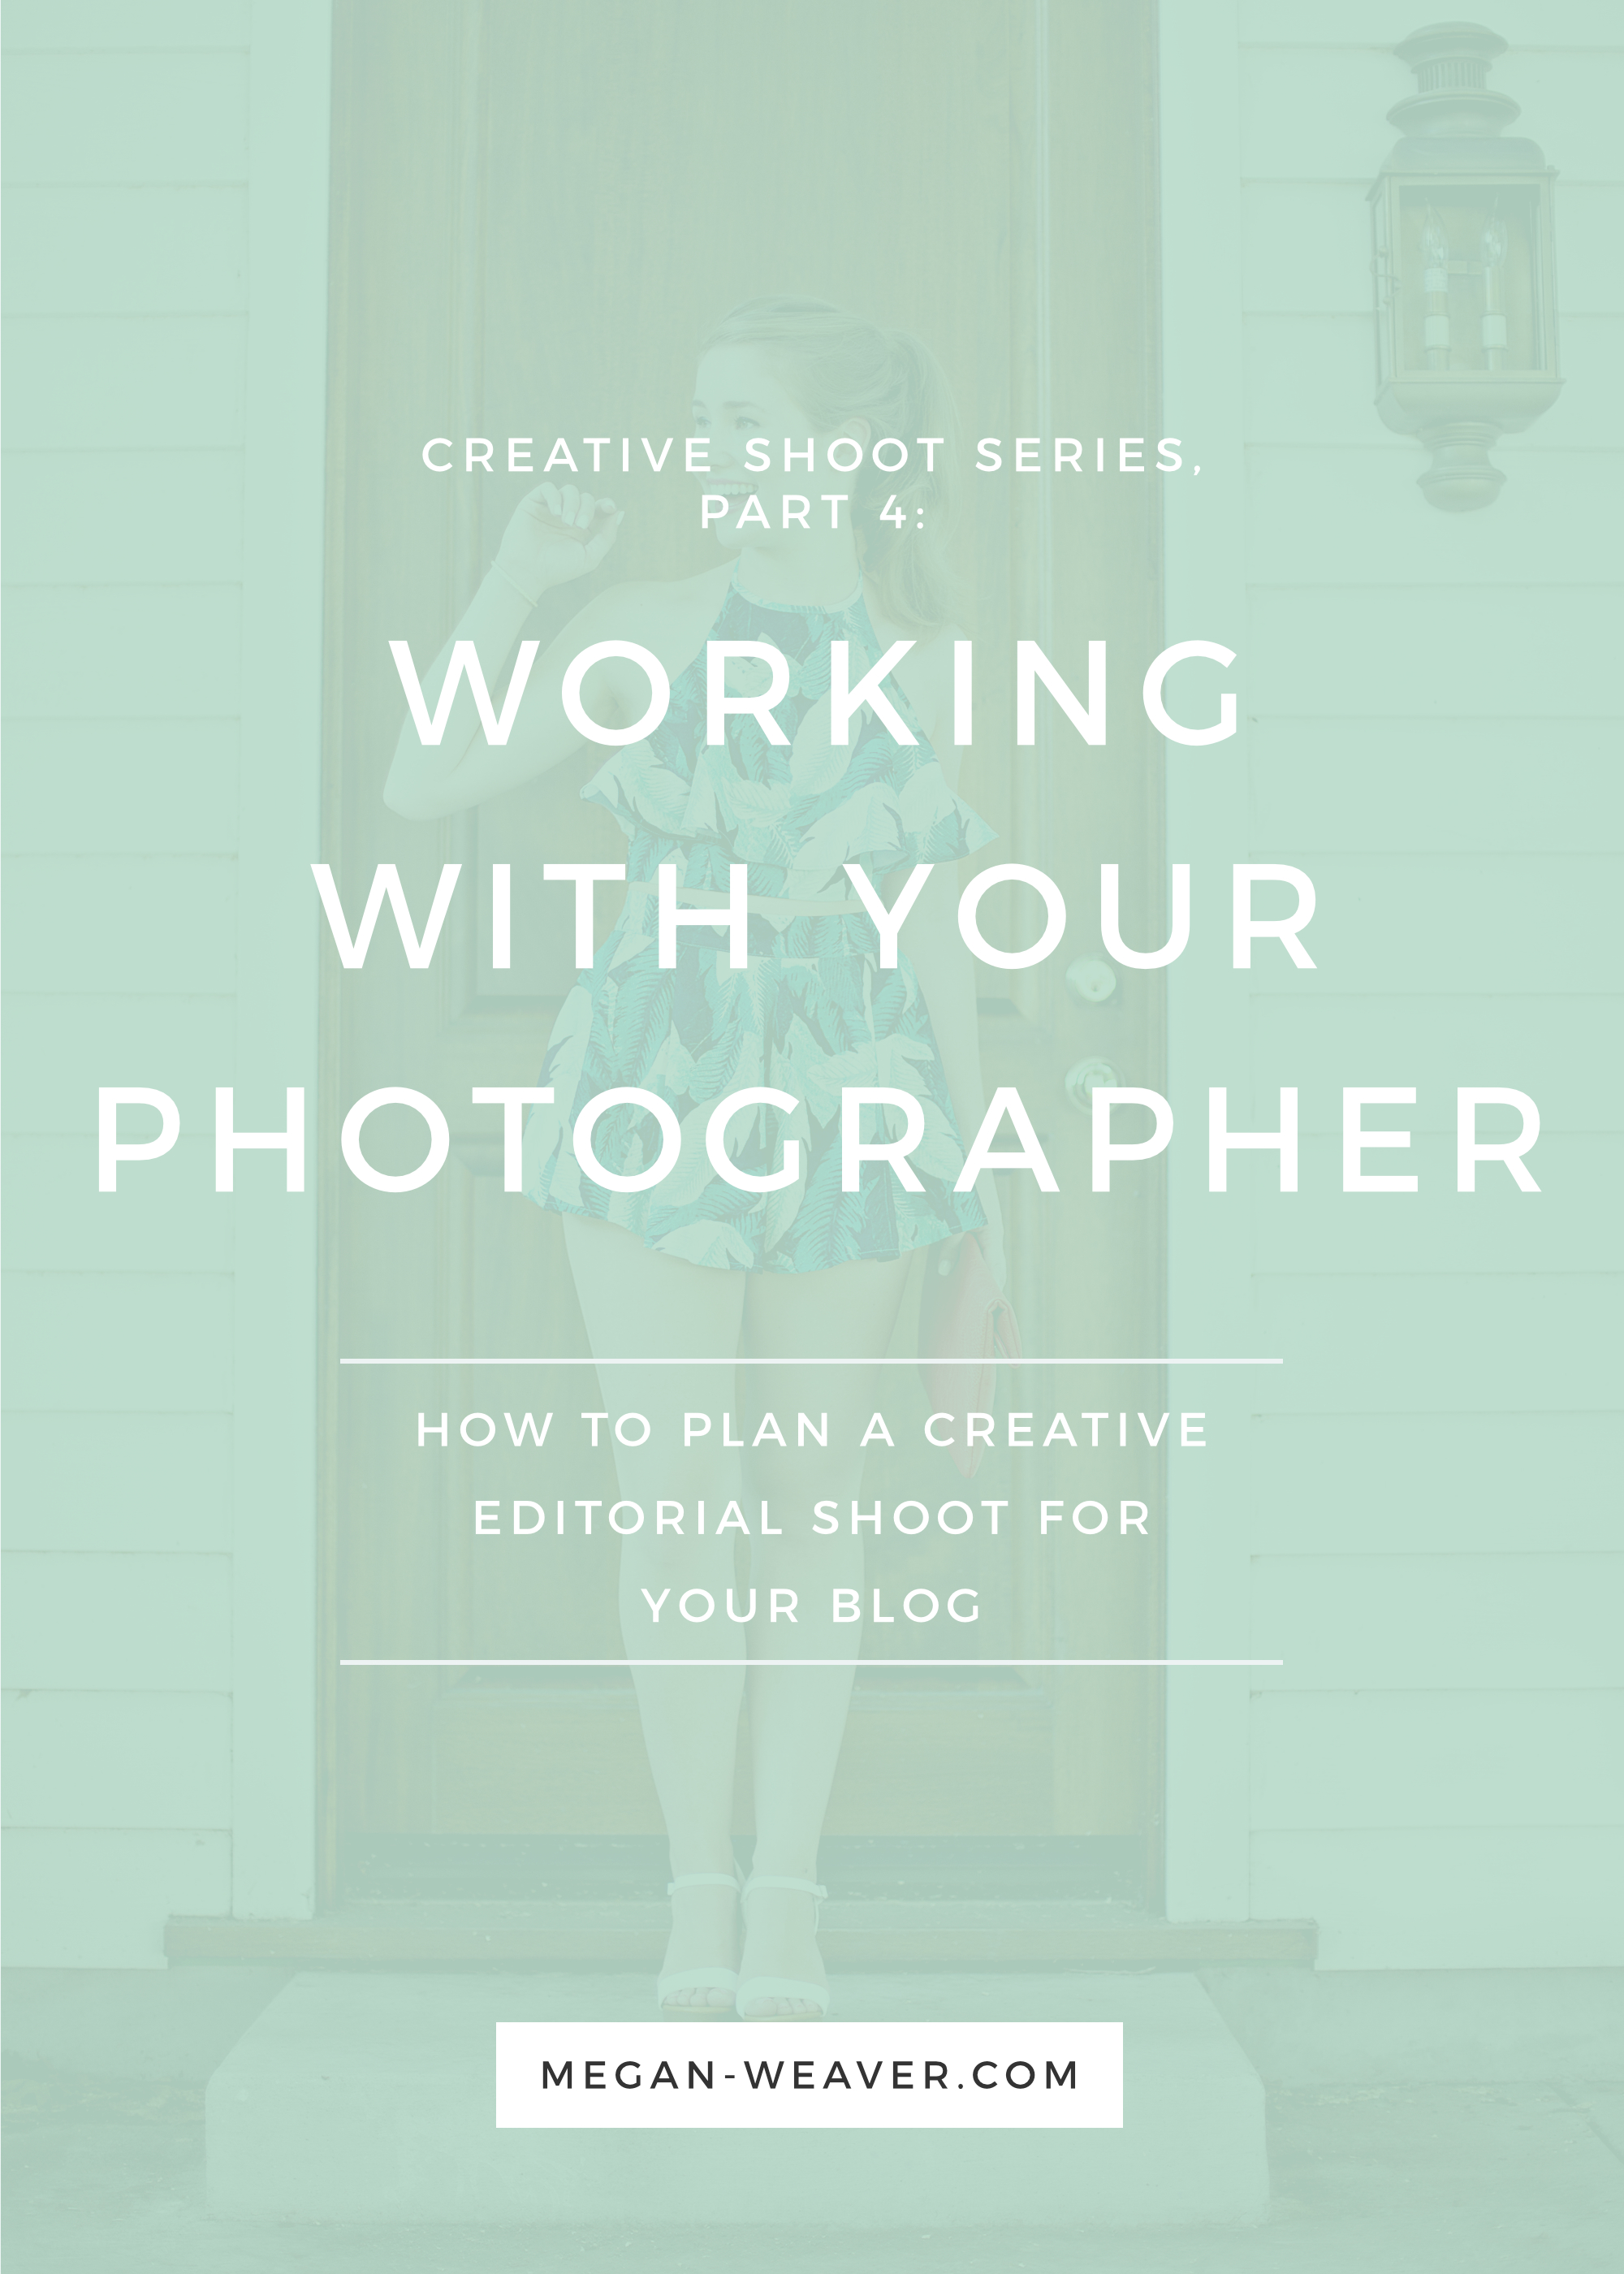 Part 4 of our Creative Shoot Series is all about working with your photographer—from how to find the best one for your brand to coordinating plans for a successful shoot.